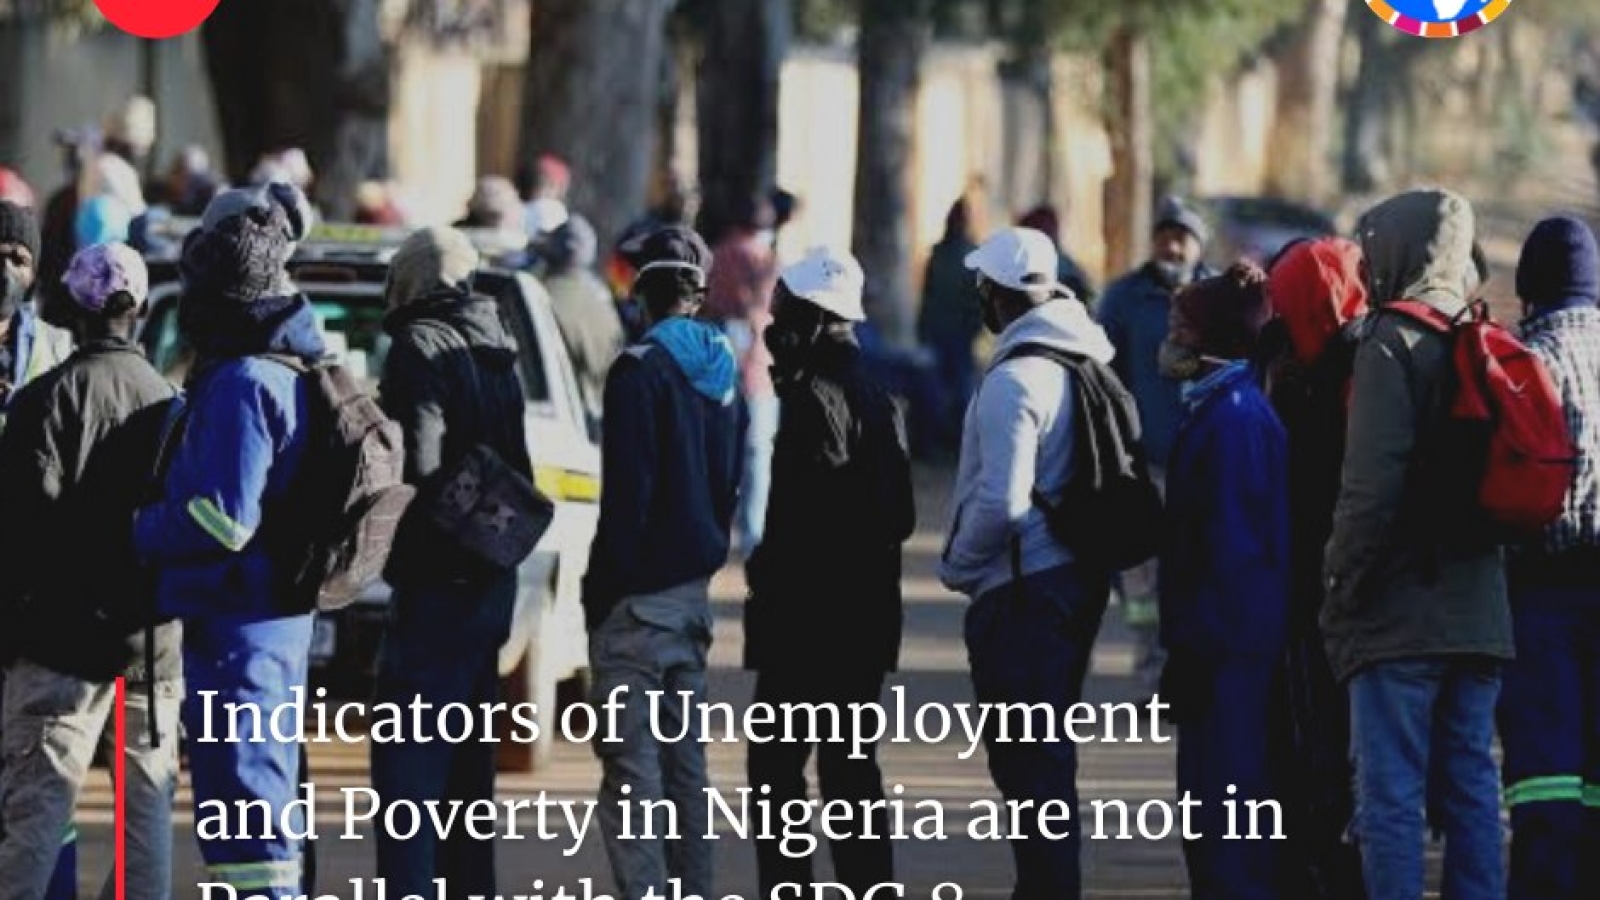 Indicators of Unemployment and Poverty in Nigeria are not in Parallel with the SDG 8